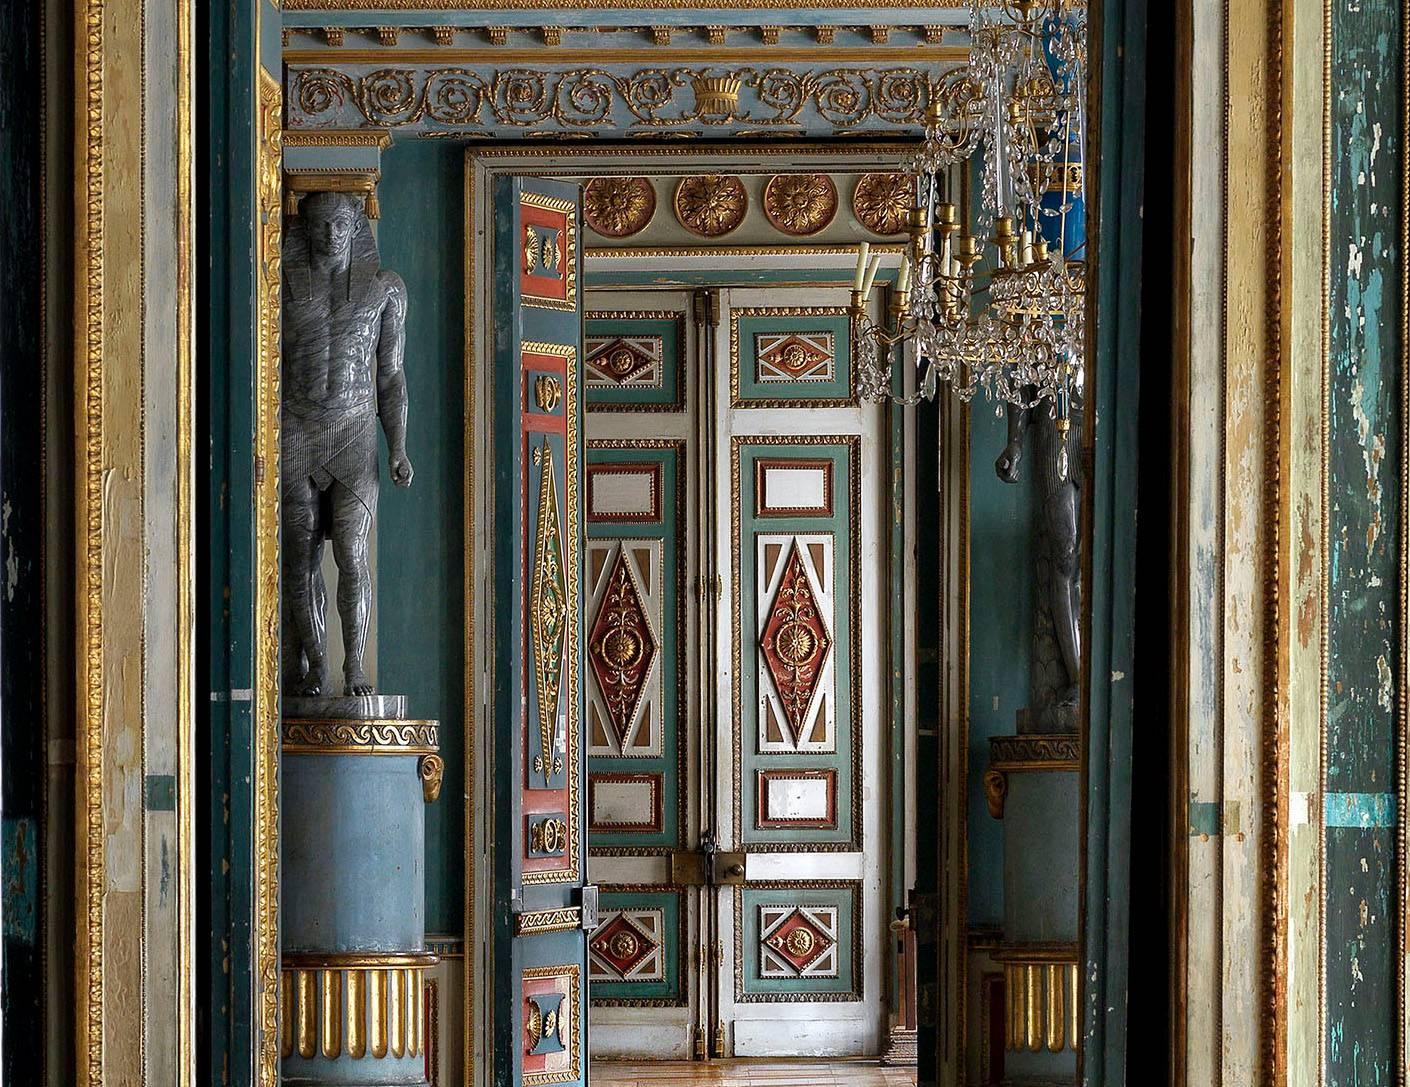 Palazzo di Ostankino, Mosca, 2015
Chromogenic print
Edition of 5
Signed, dated, and numbered on verso label   

39.5 x 47.5 inches edition of 5  
47.5 x 59 inches edition of 5  
71 x 88.5 inches edition of 5   

Florentine photographer Massimo